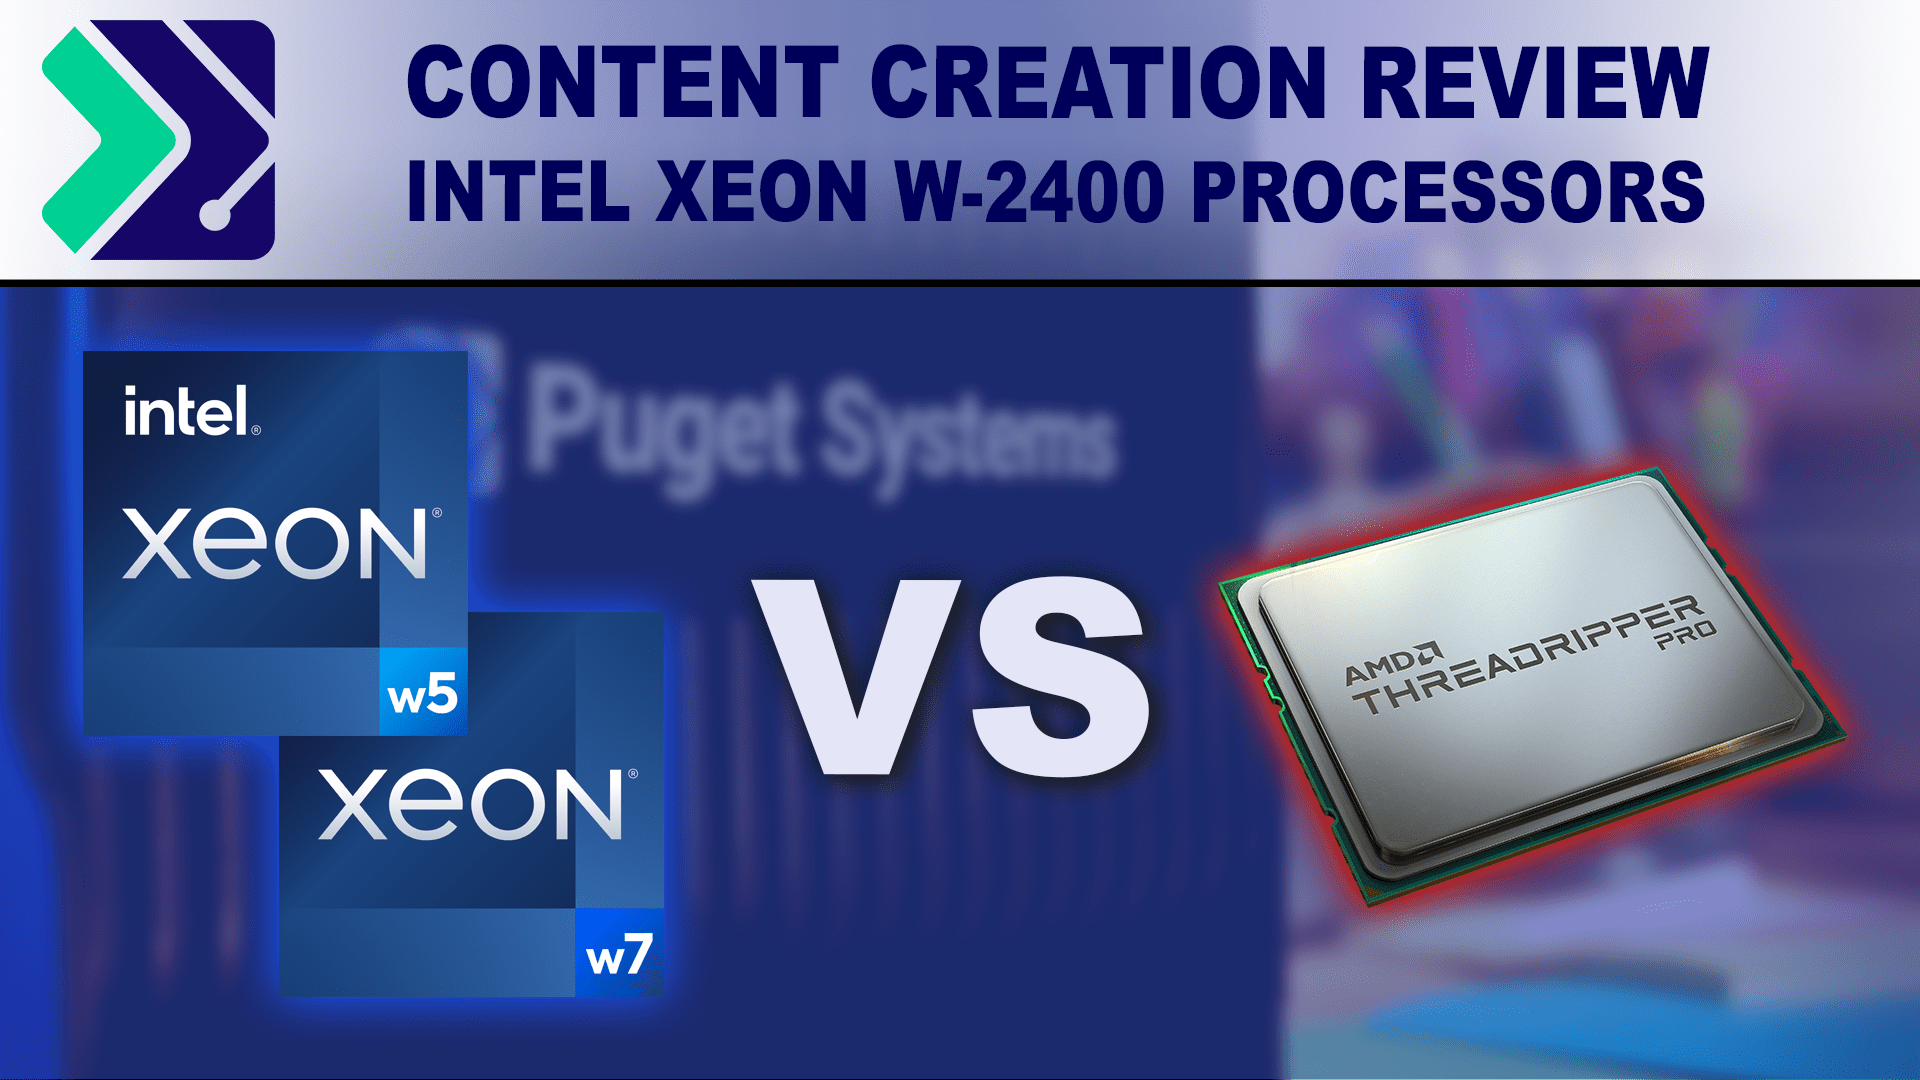 Intel Xeon W-2400 vs AMD Theadripper PRO 5000 Content Creation Performance Review